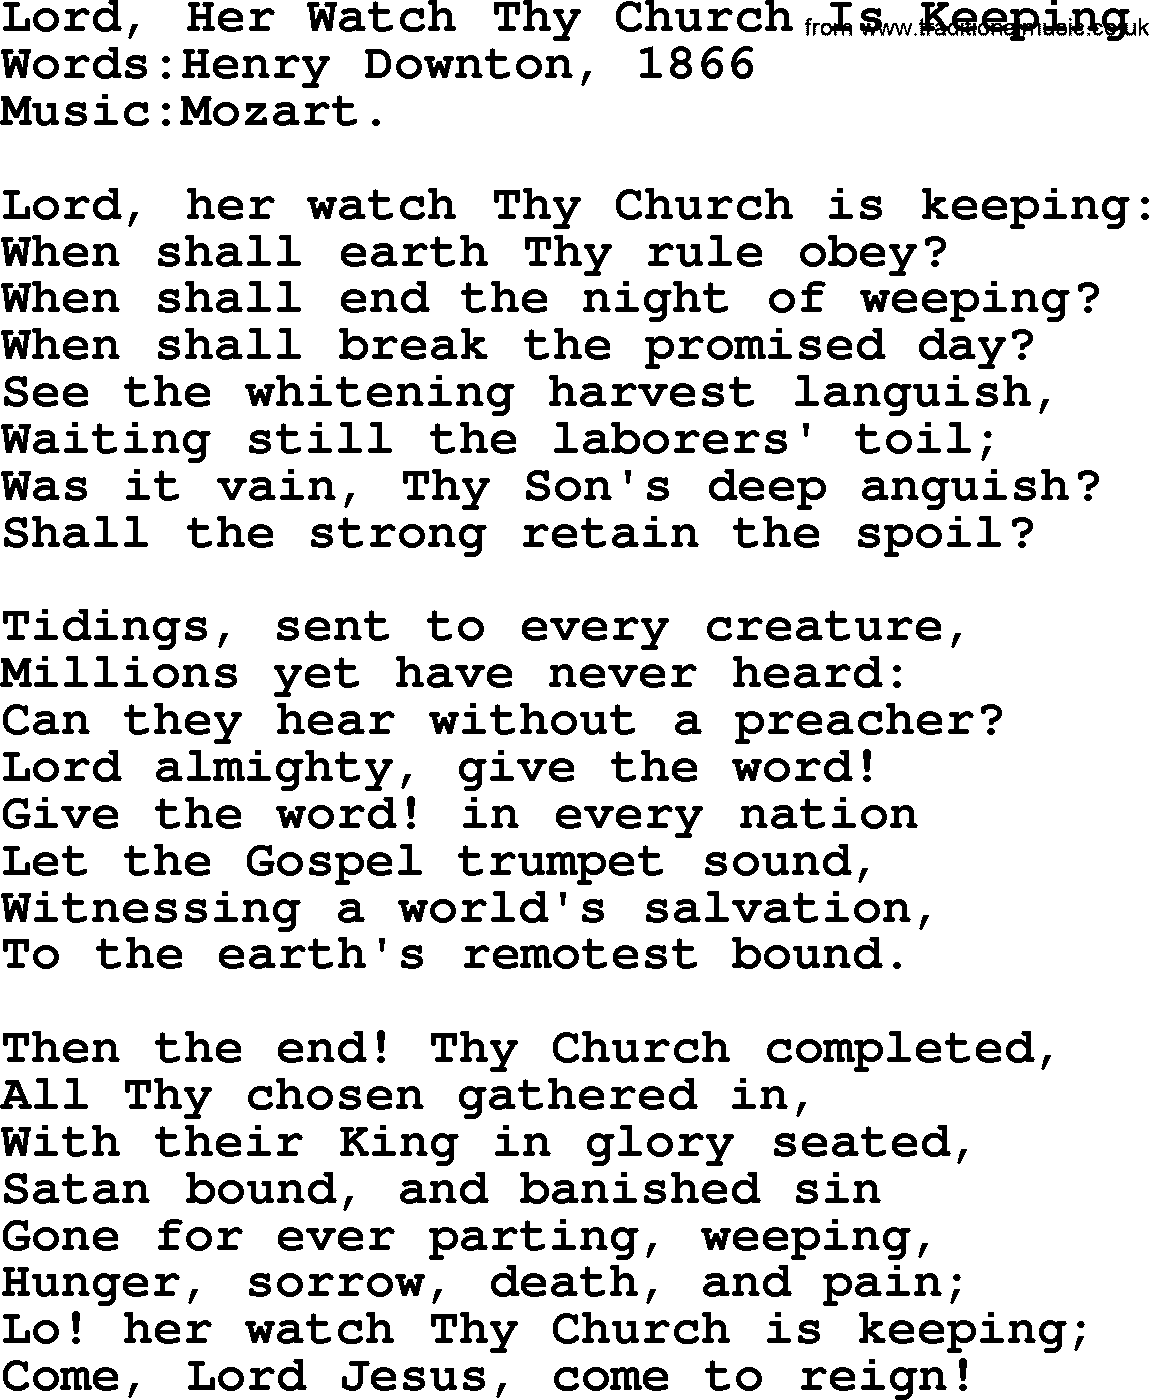 Christian hymns and songs about Jesus' Return(The Second Coming): Lord, Her Watch Thy Church Is Keeping, lyrics with PDF